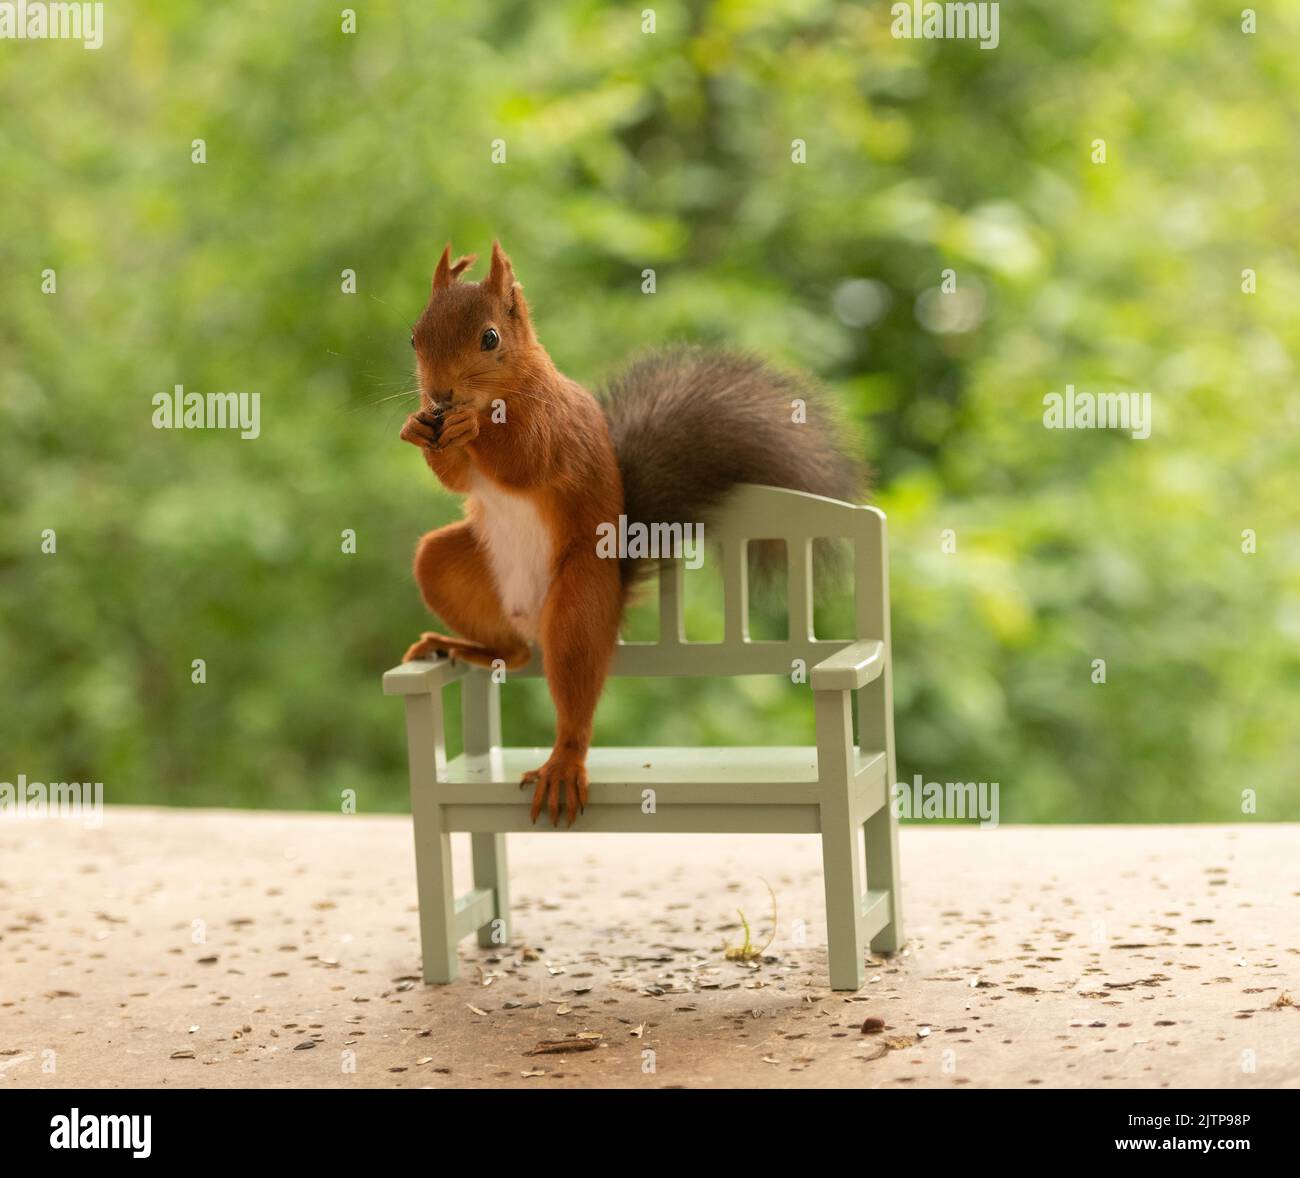 red squirrel is standing on an green bench Stock Photo